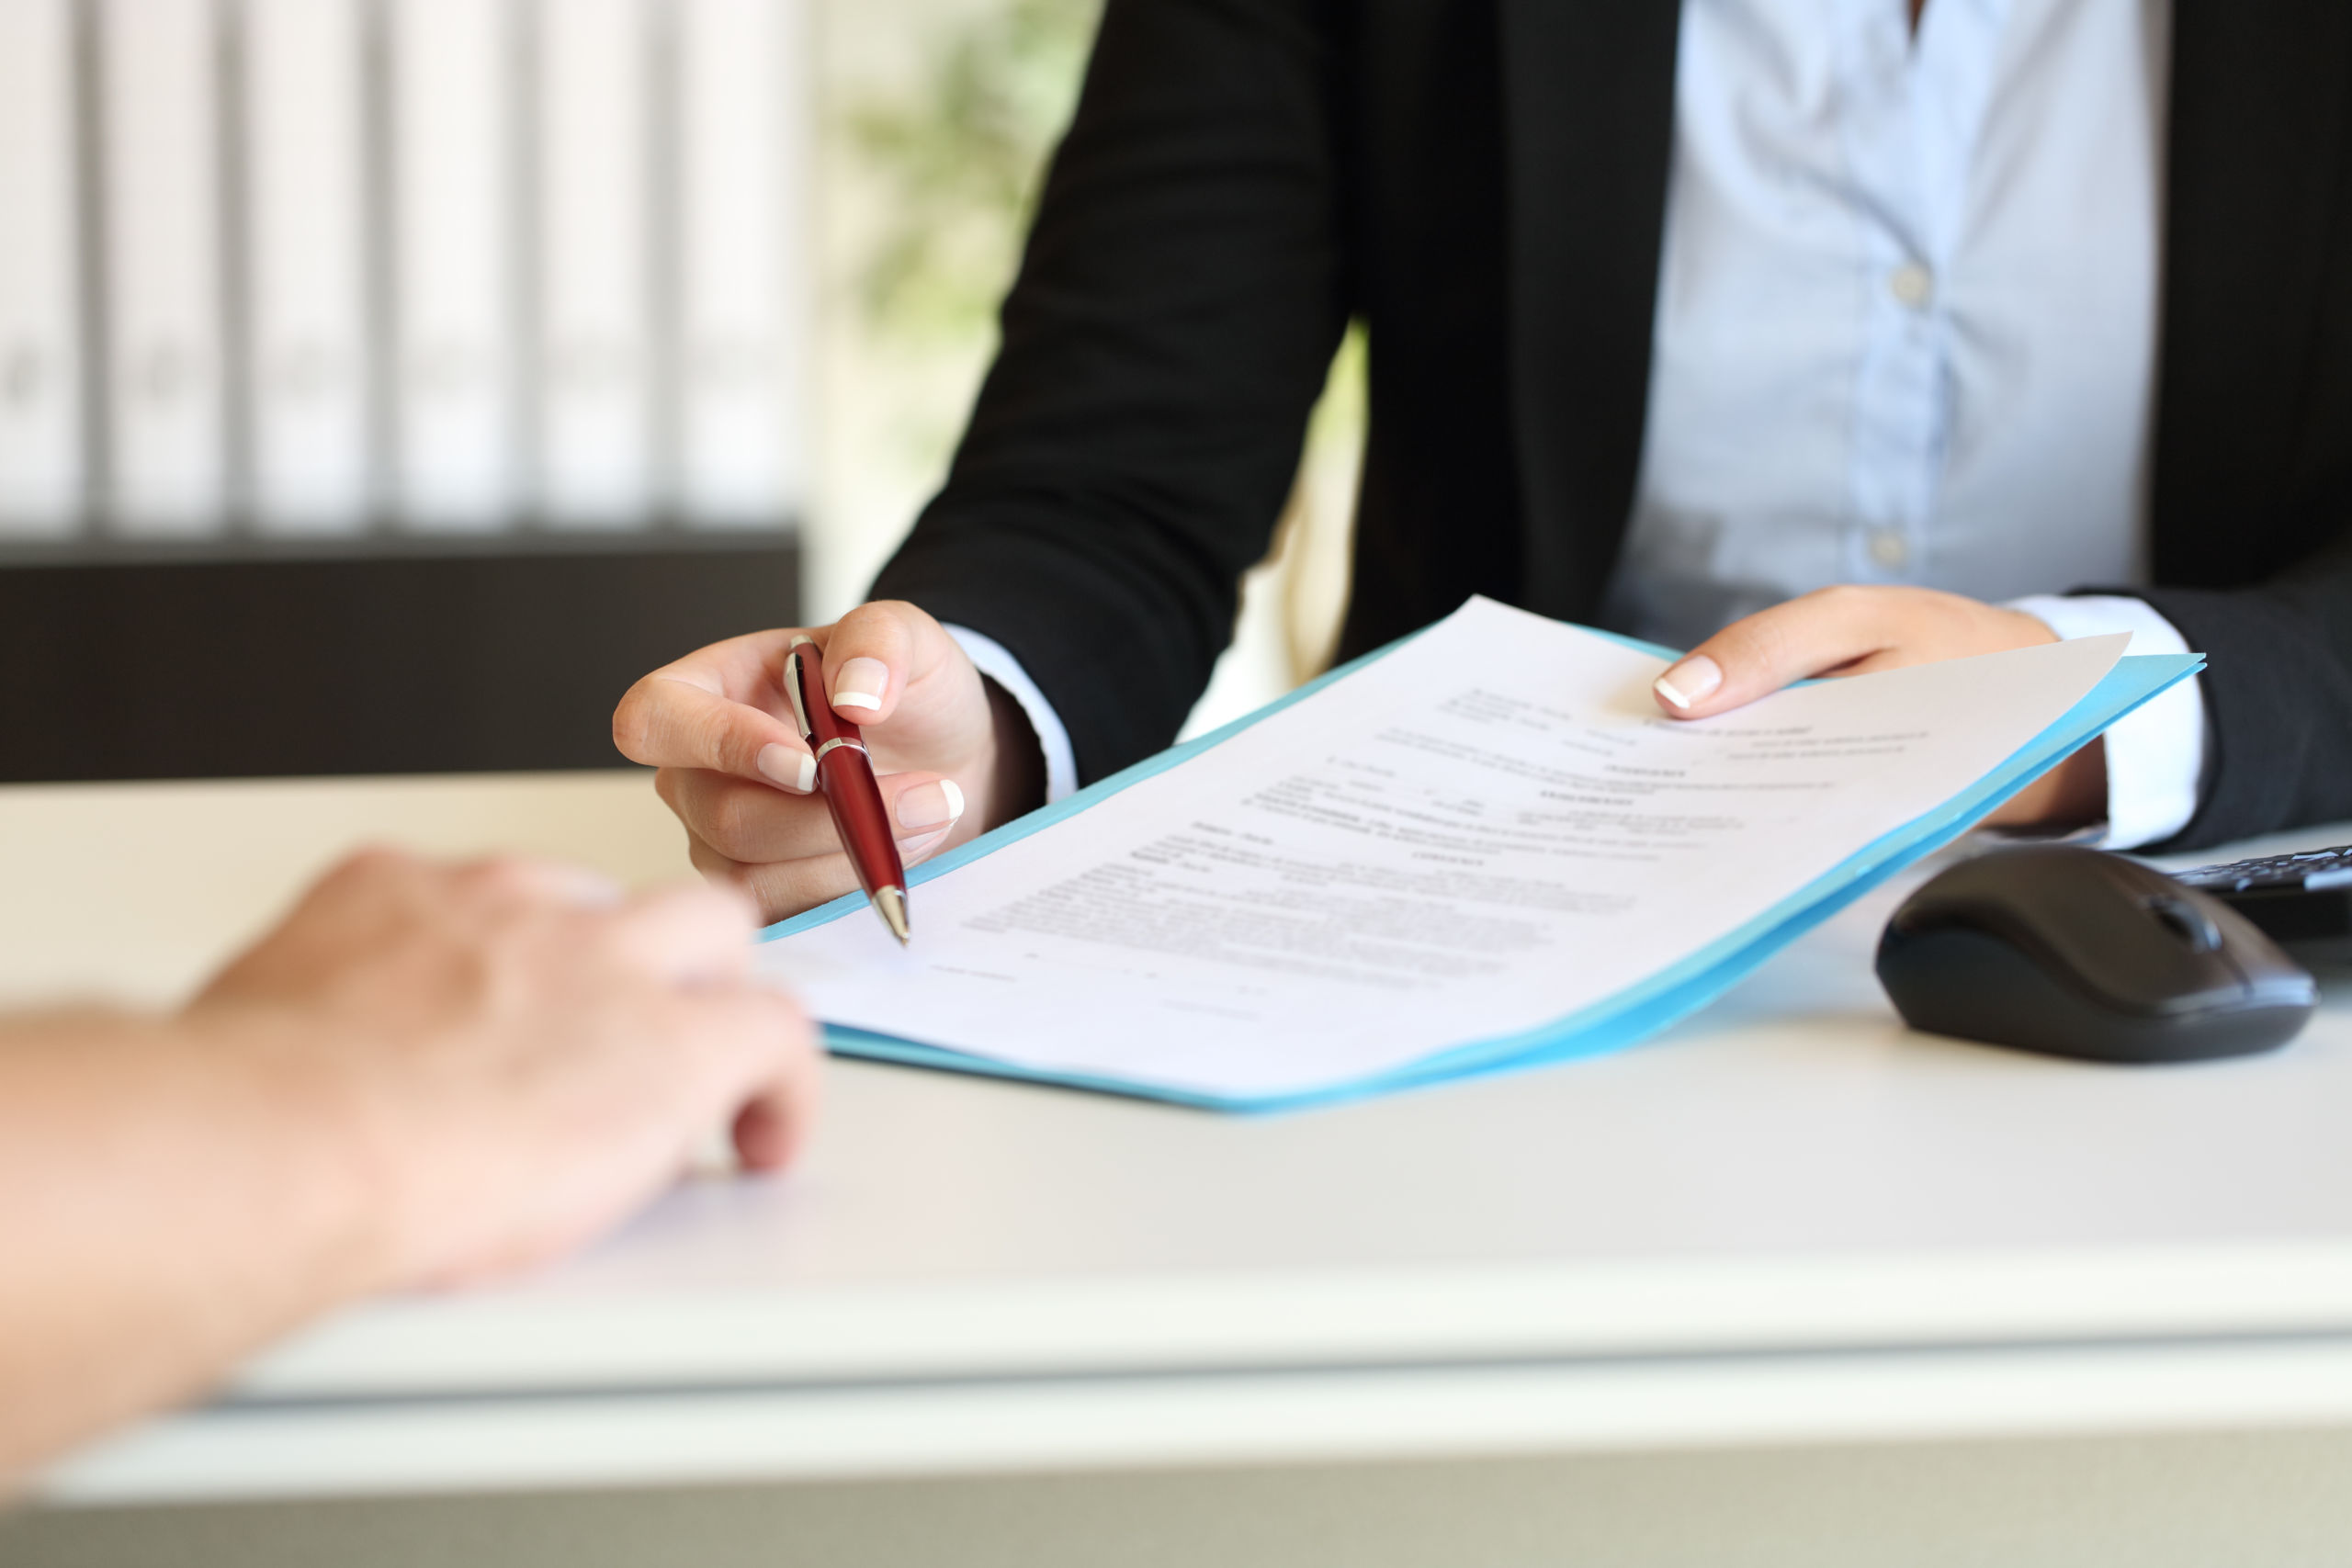 Restrictive Covenants and Non-Compete Agreements: Trends, Developments, and Best Practices